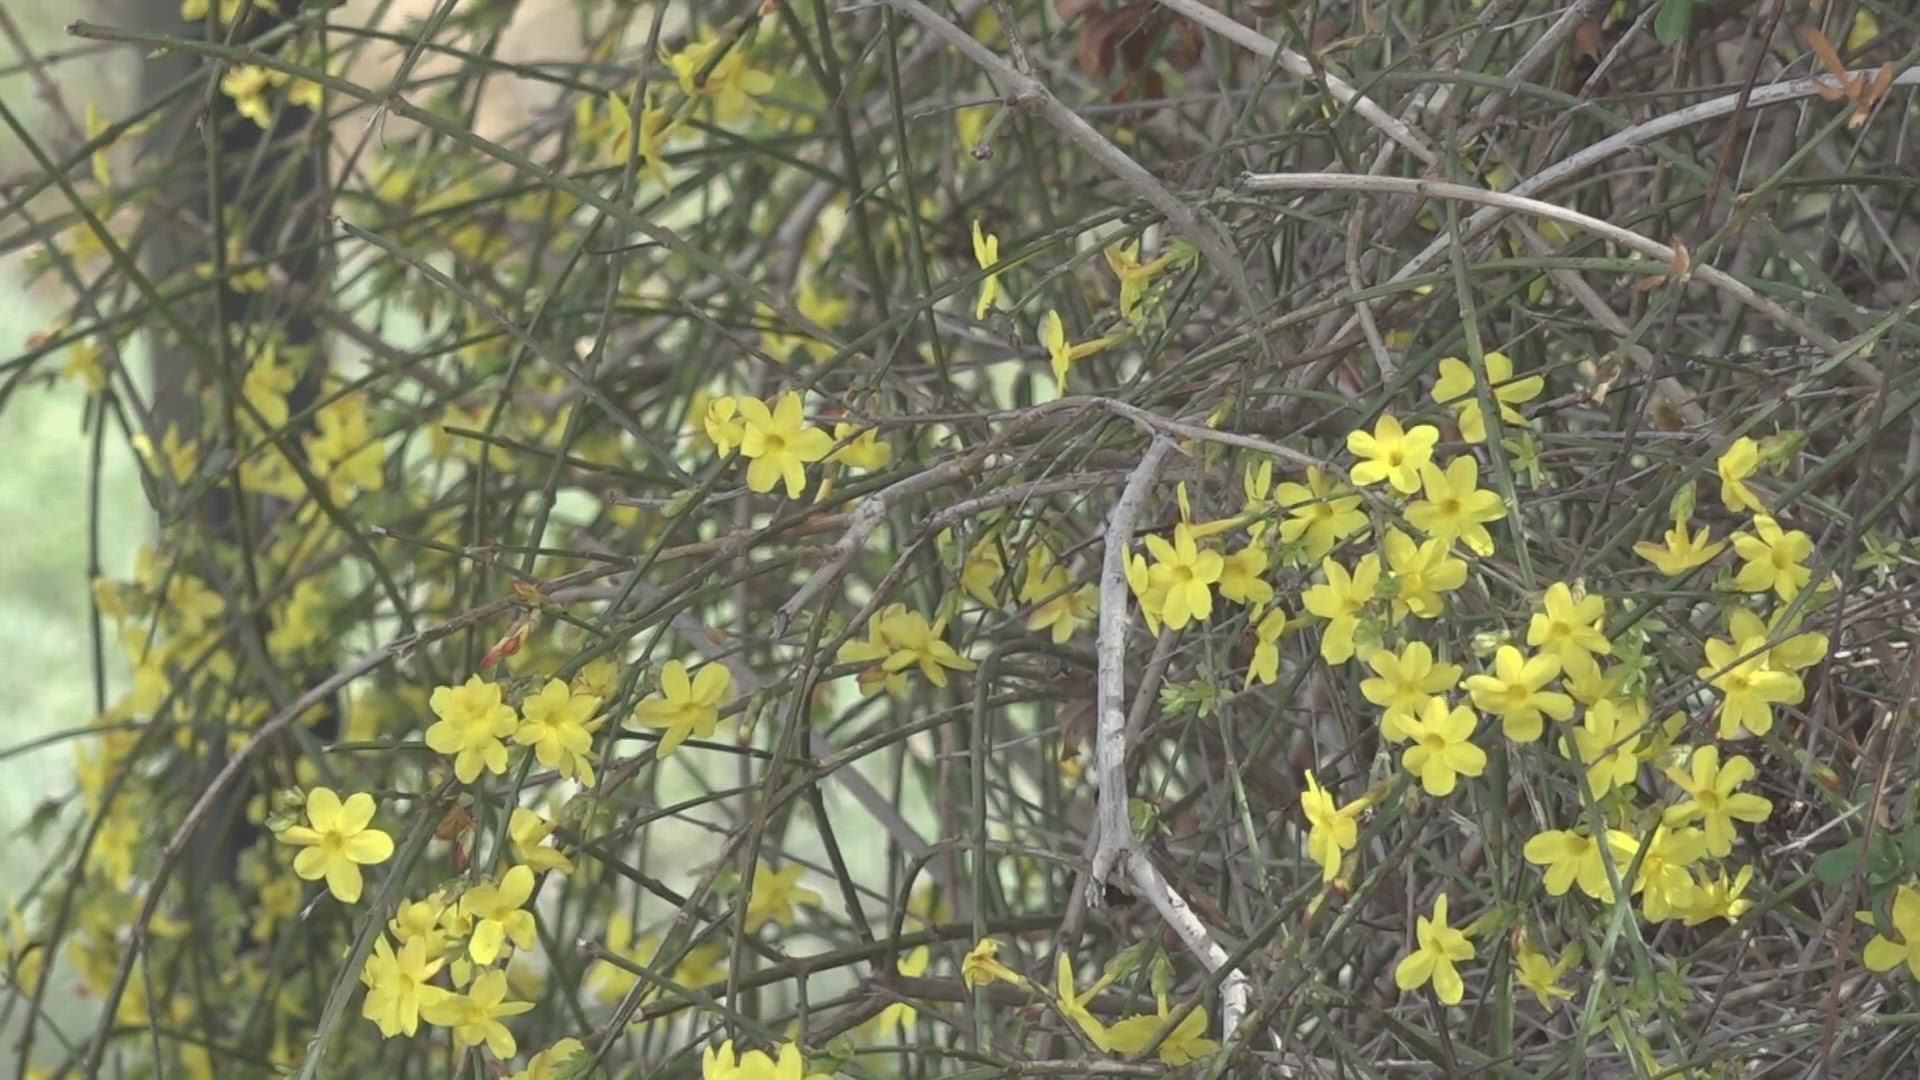 What are the effects of an early spring on nature in West Texas